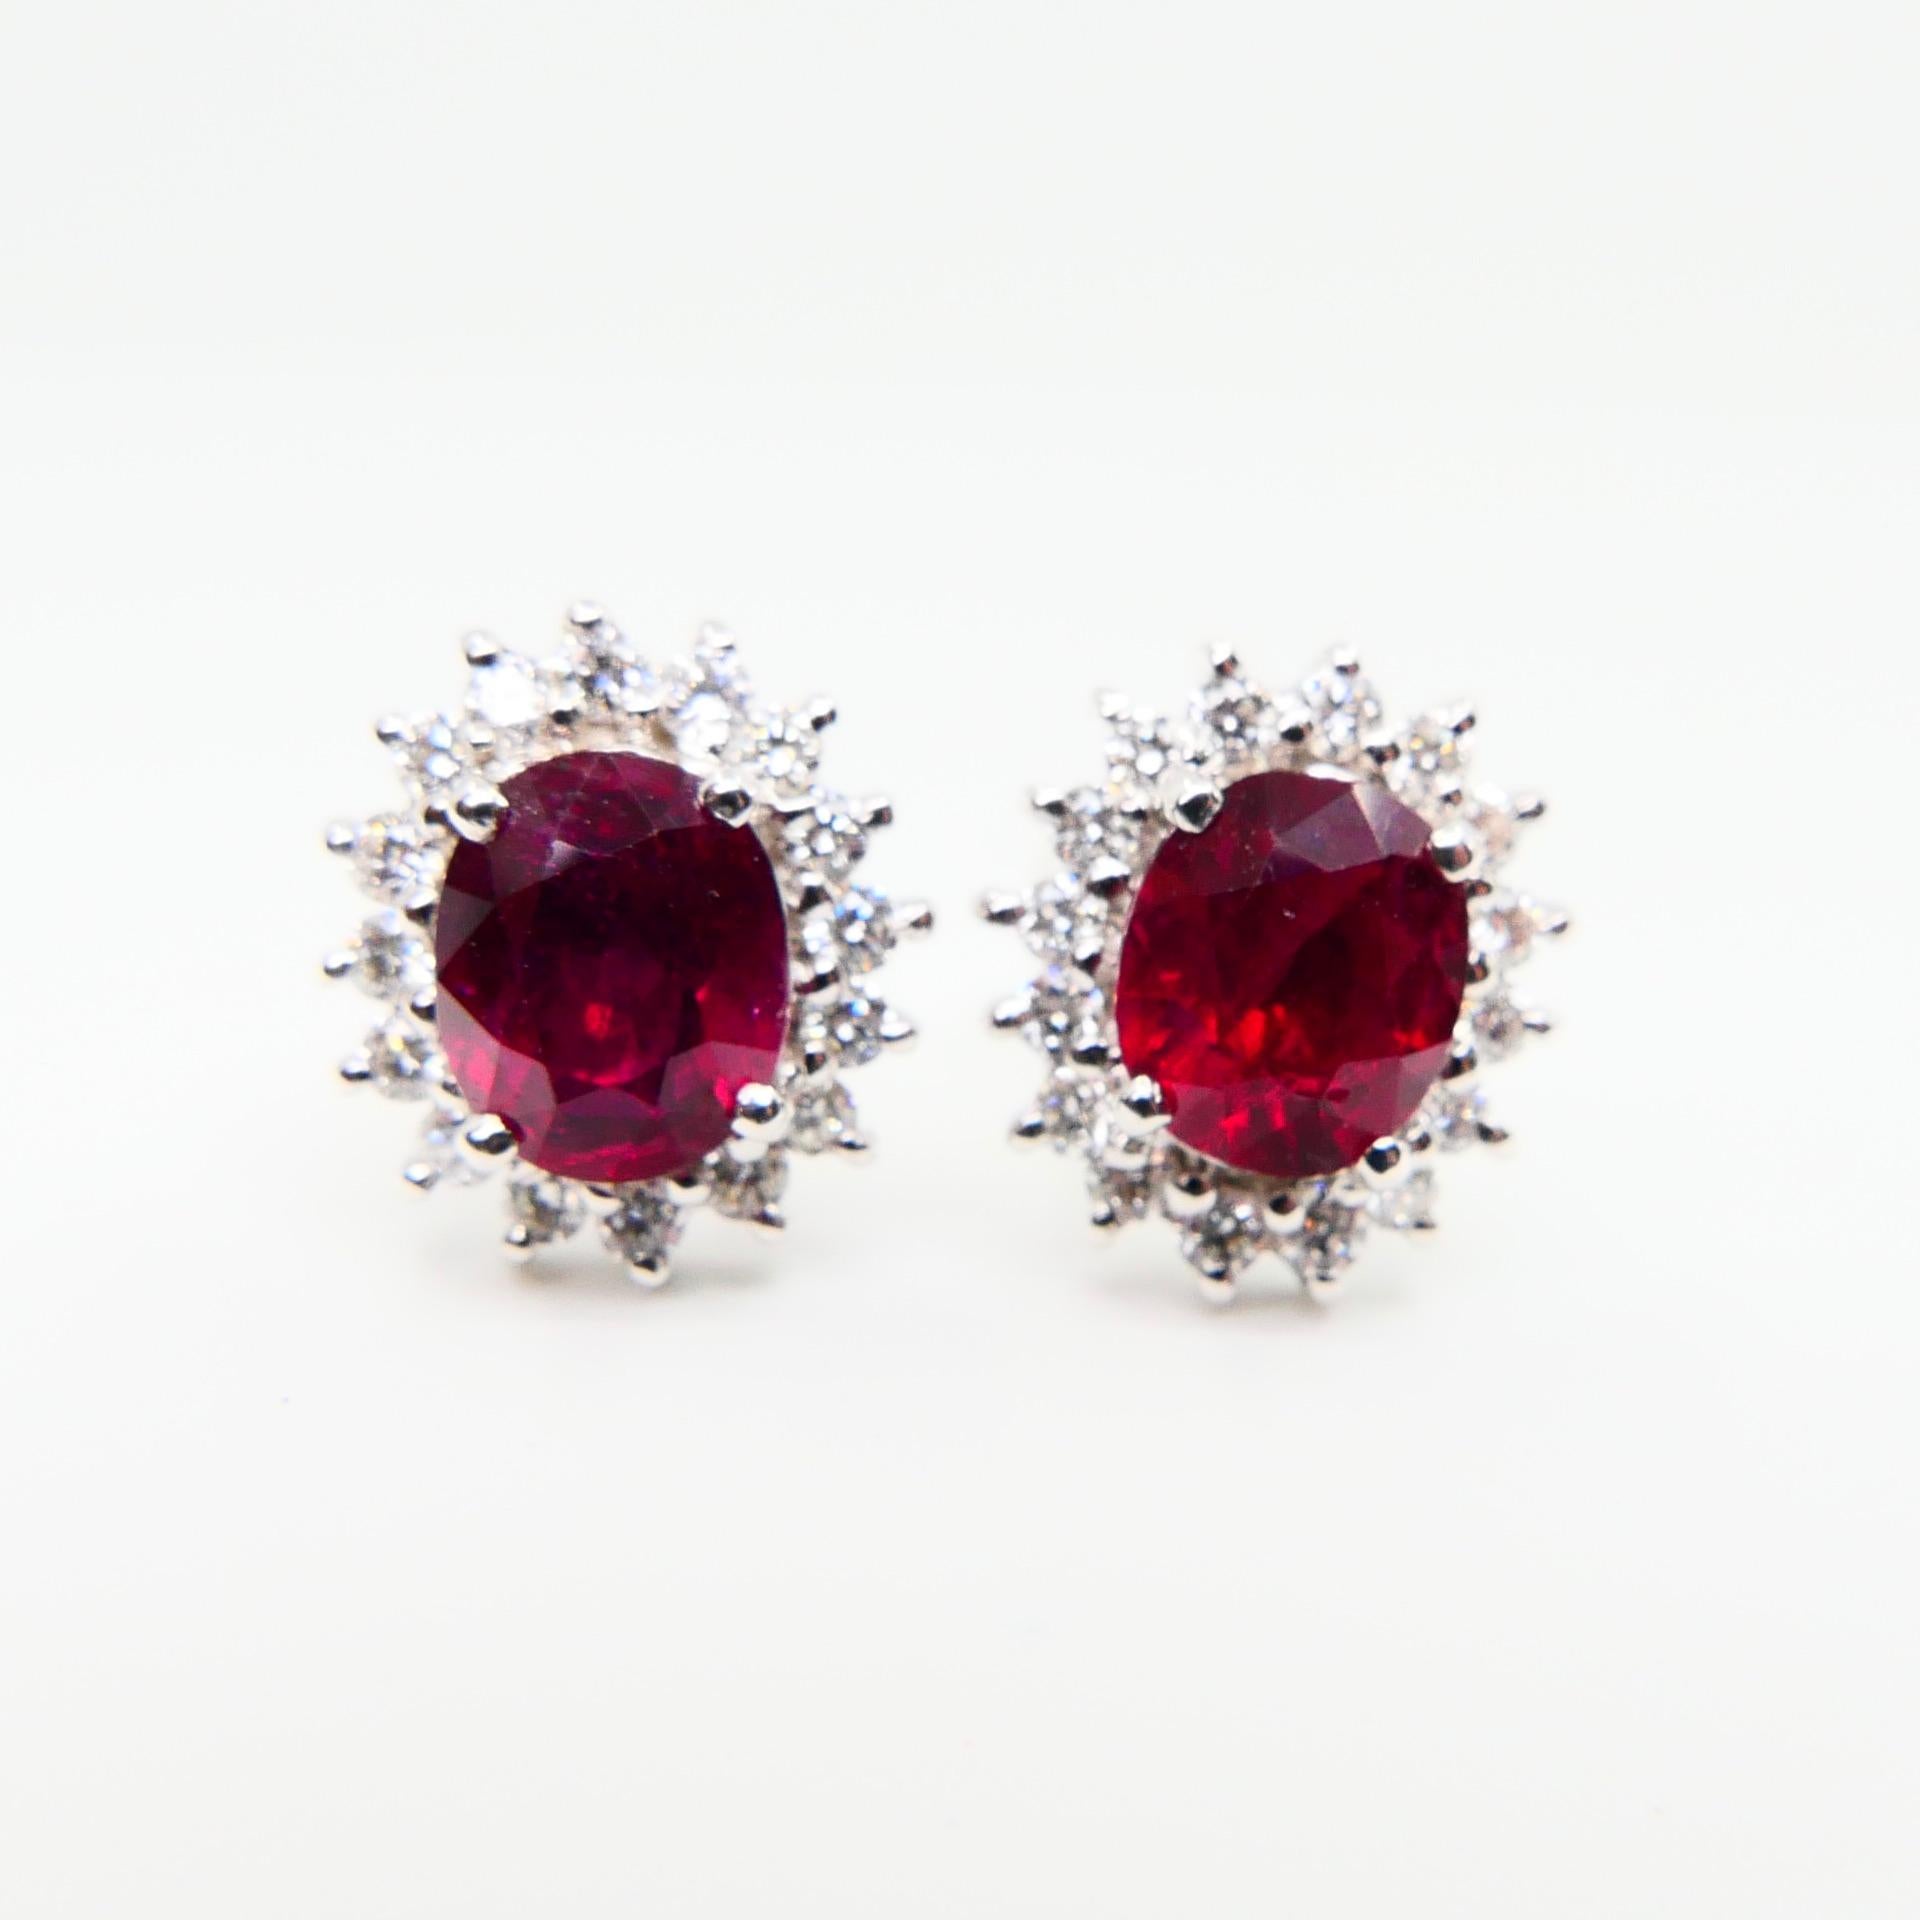 Women's Vivid Red Ruby 2.09 Carat and Diamond Stud Earrings, Close to Pigeon Blood Red